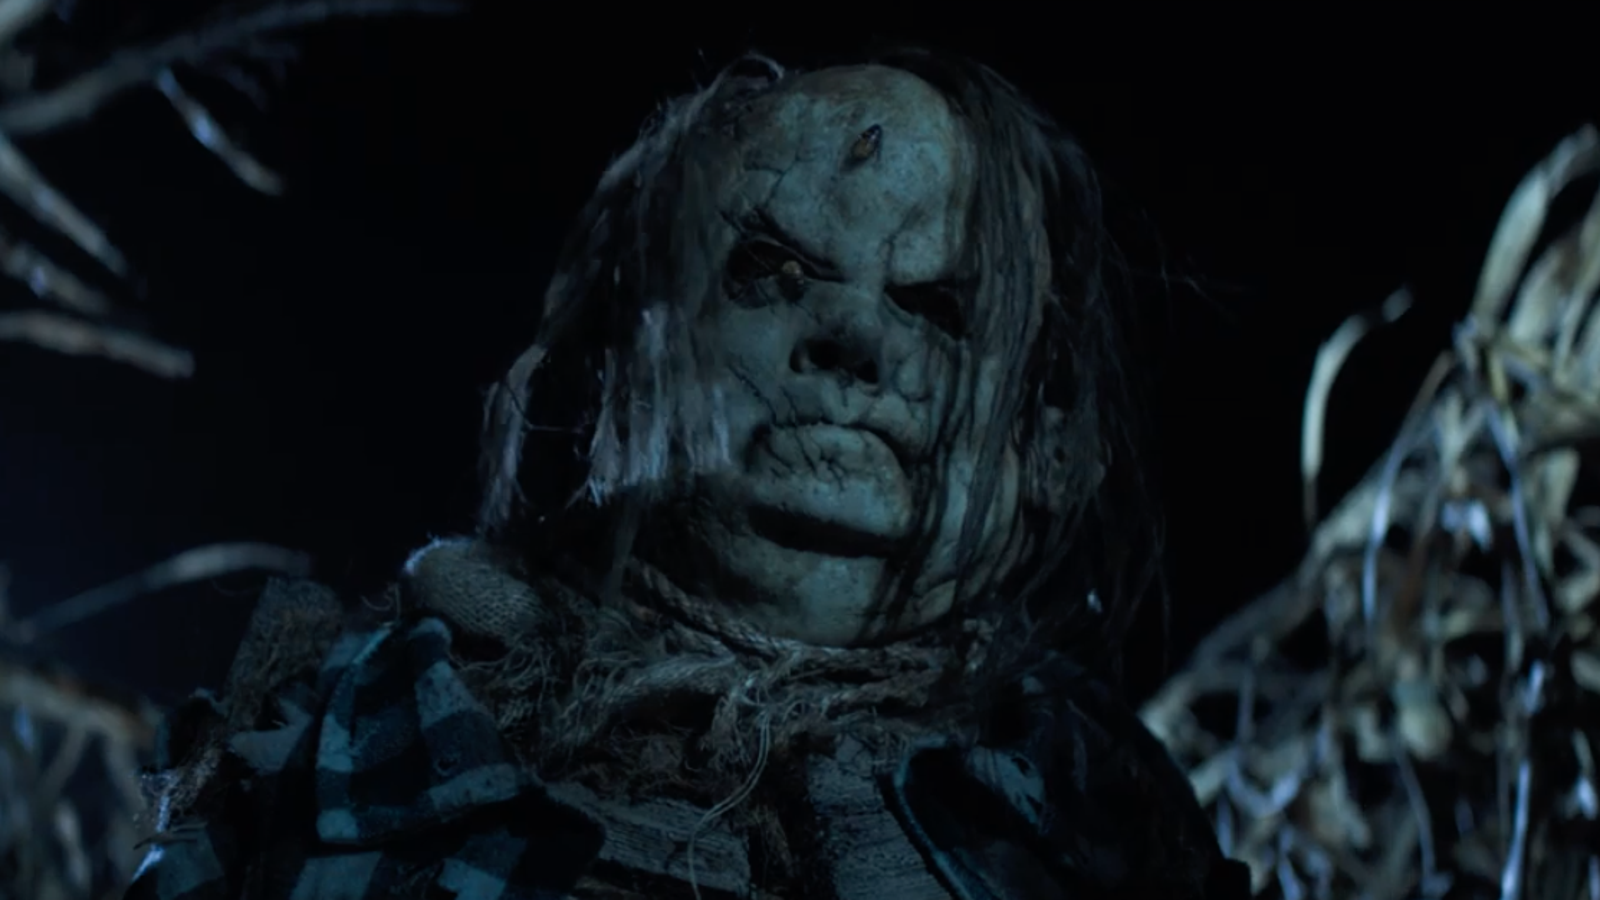 Scary Stories To Tell In The Dark Guillermo Del Toro Trailer